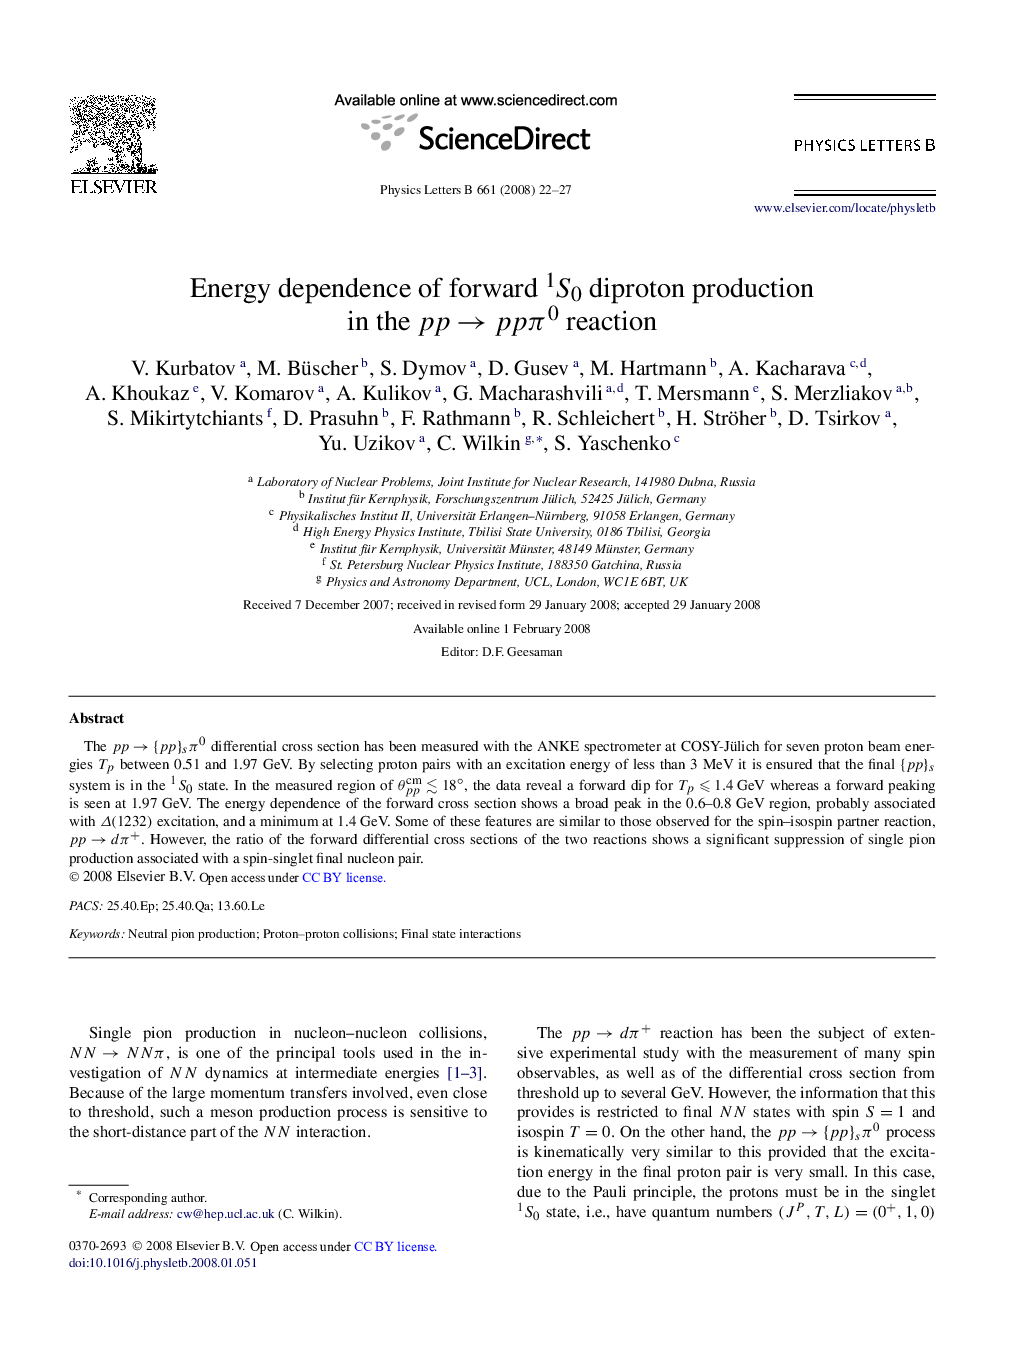 Energy dependence of forward 1S0 diproton production in the ppâppÏ0 reaction